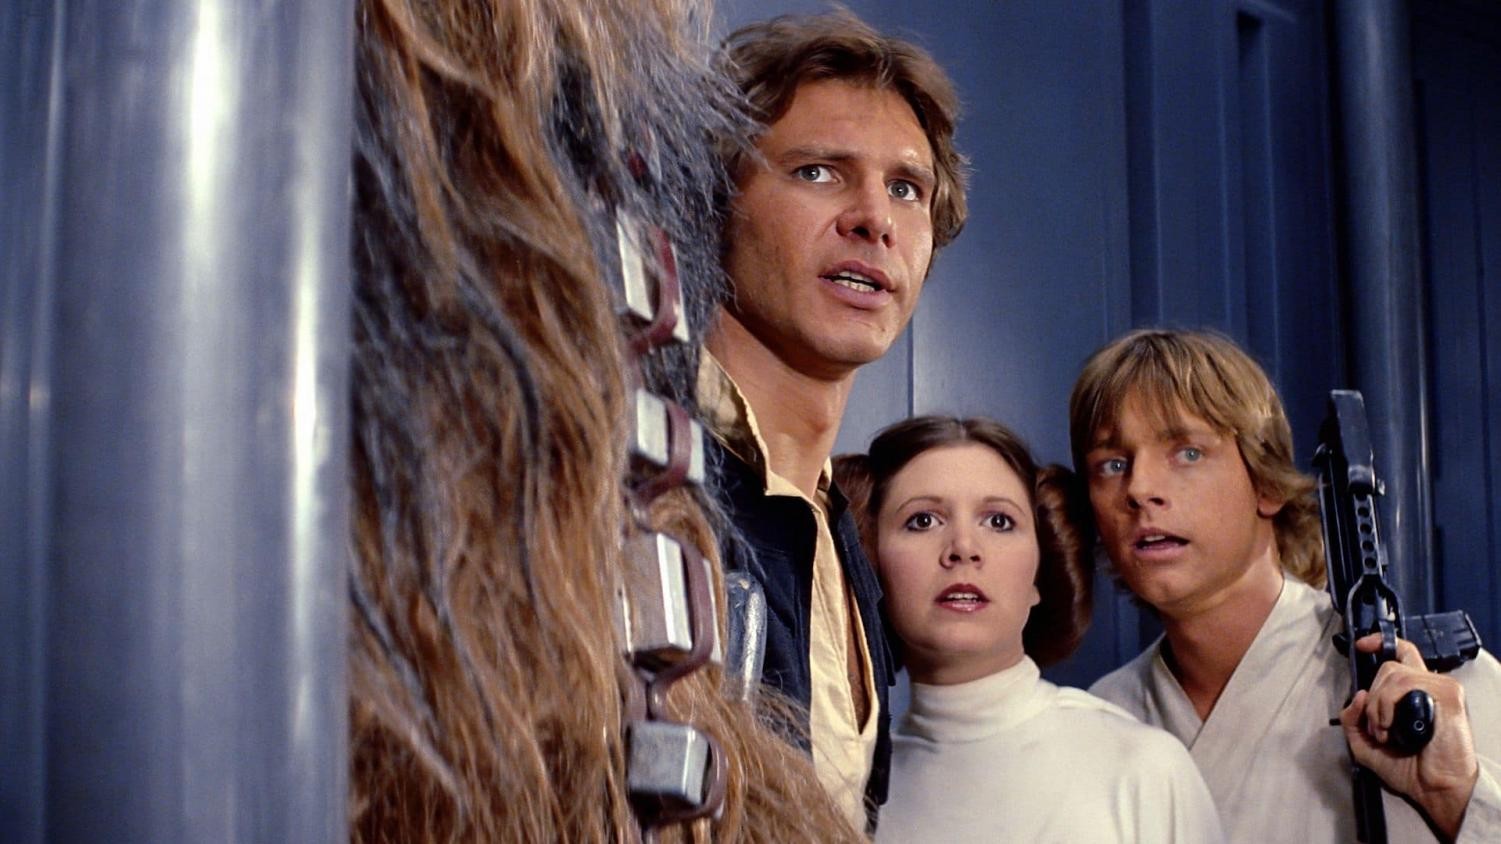 The leading trio of Luke, Han, and Leia, along with Chewbacca in Star Wars